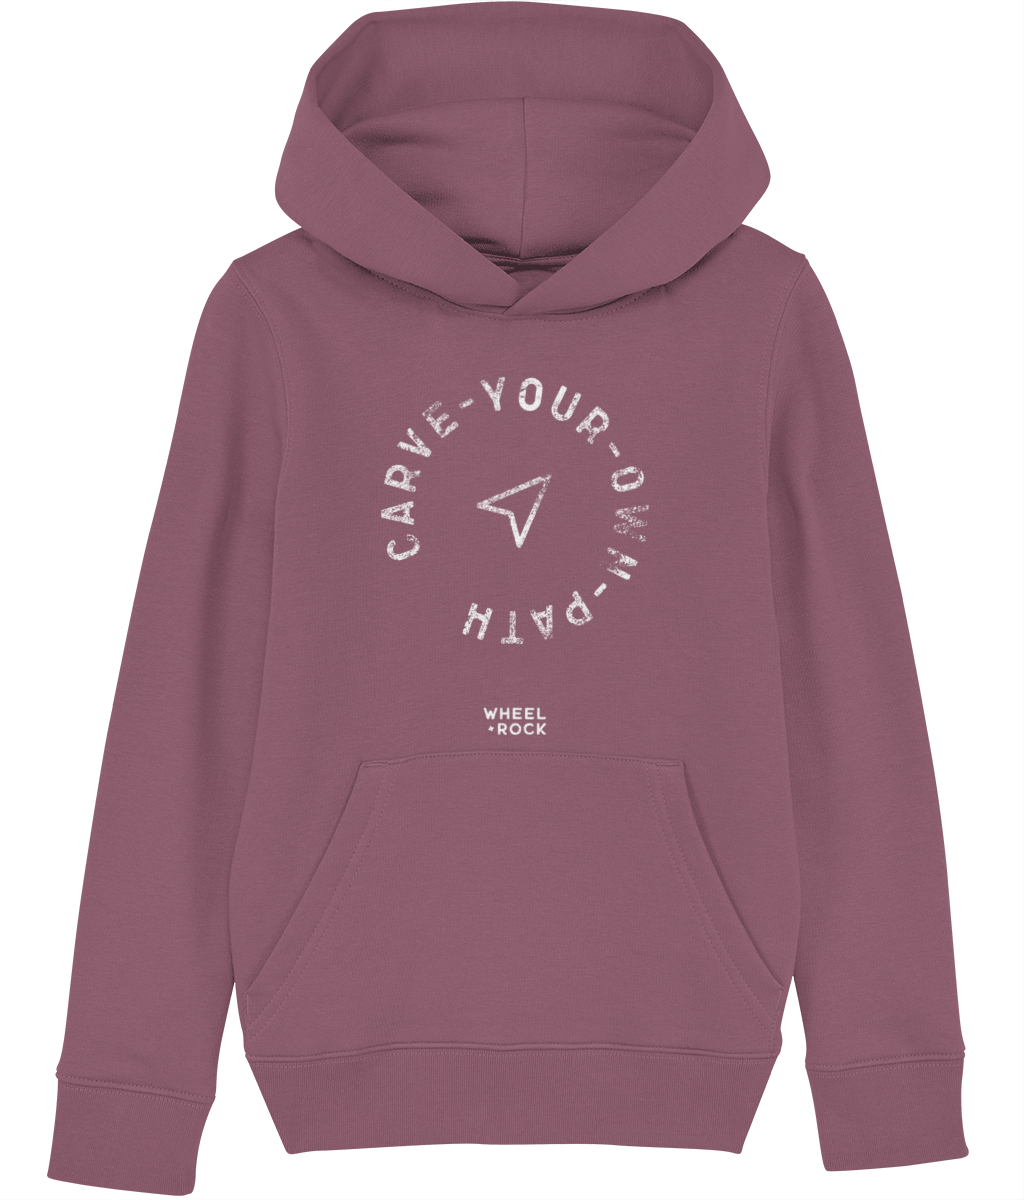 Carve Your Own Path - Kids Hoodie - WARMS